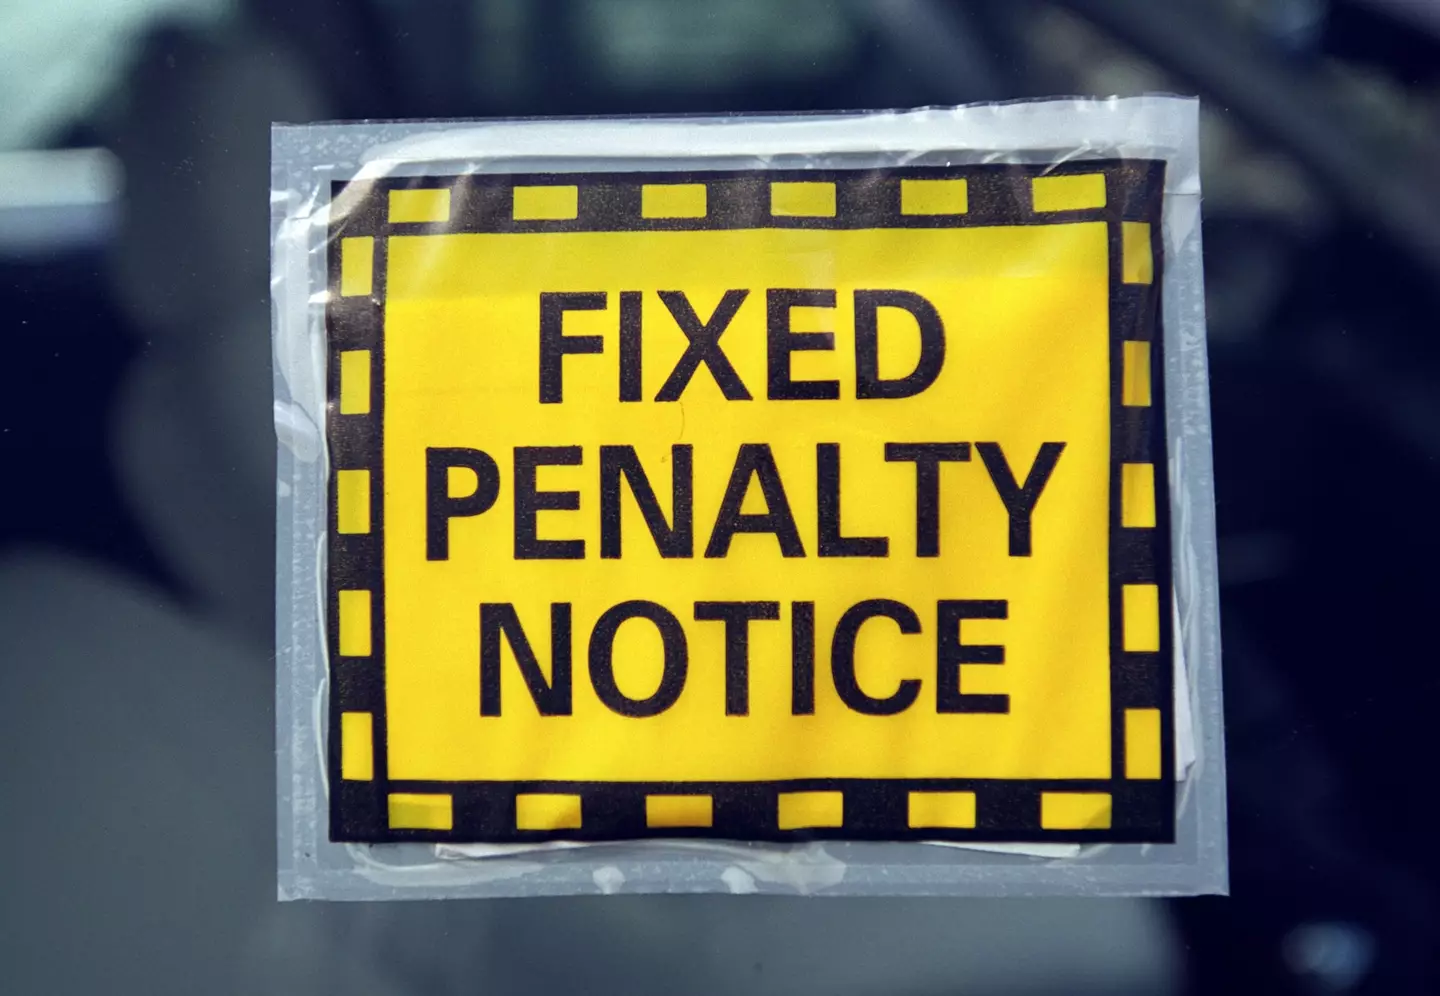 Fixed penalty notices can be the worse, but there is a way around the ones 3GS impose.